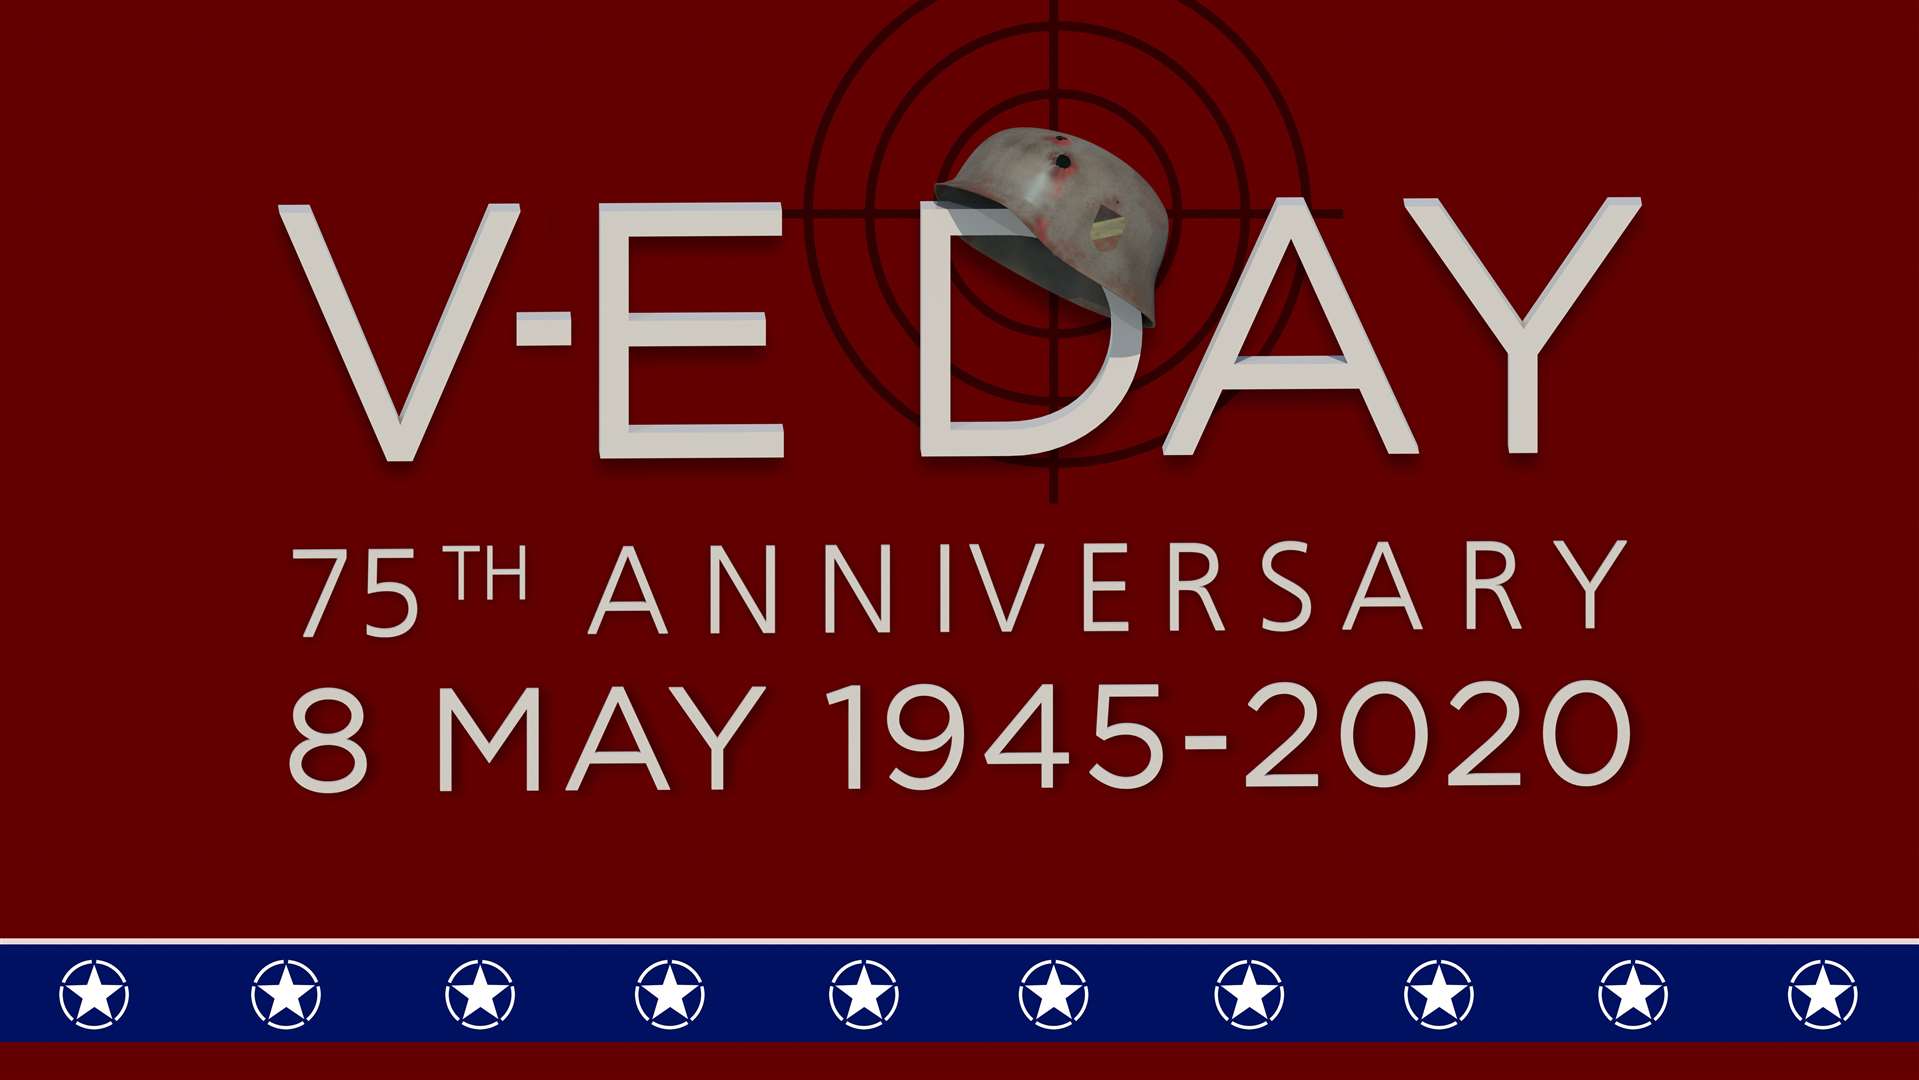 Join a singalong on VE Day to commemorate RVS volunteers.